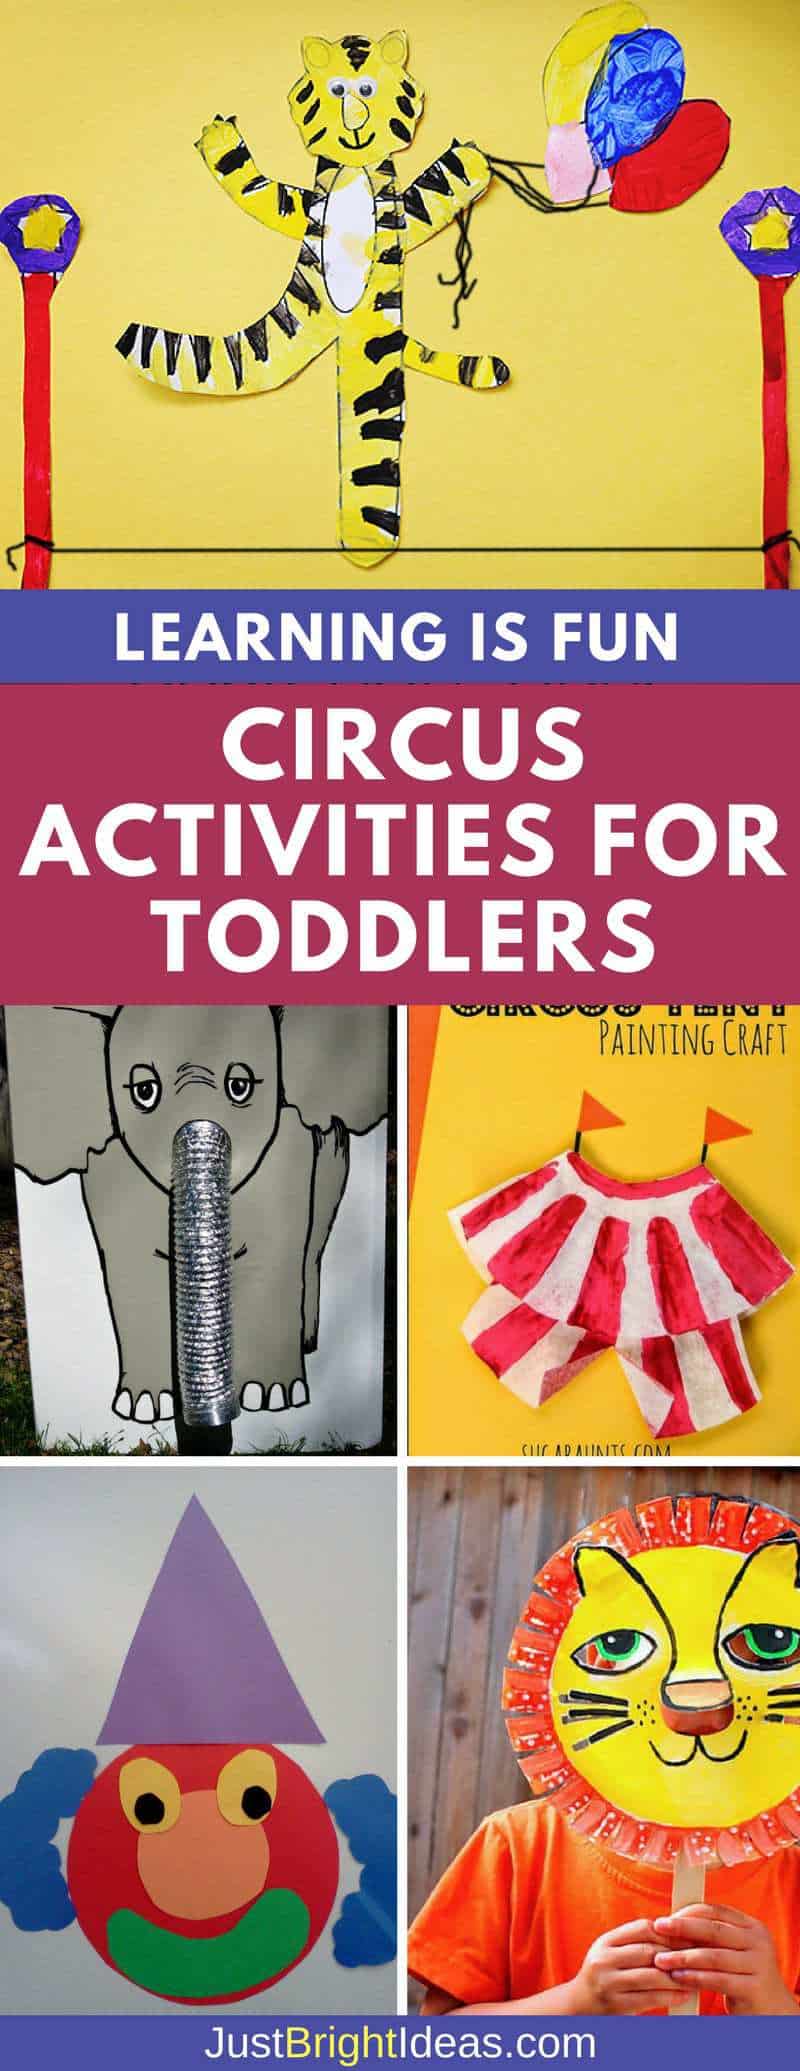 circus activities for toddlers